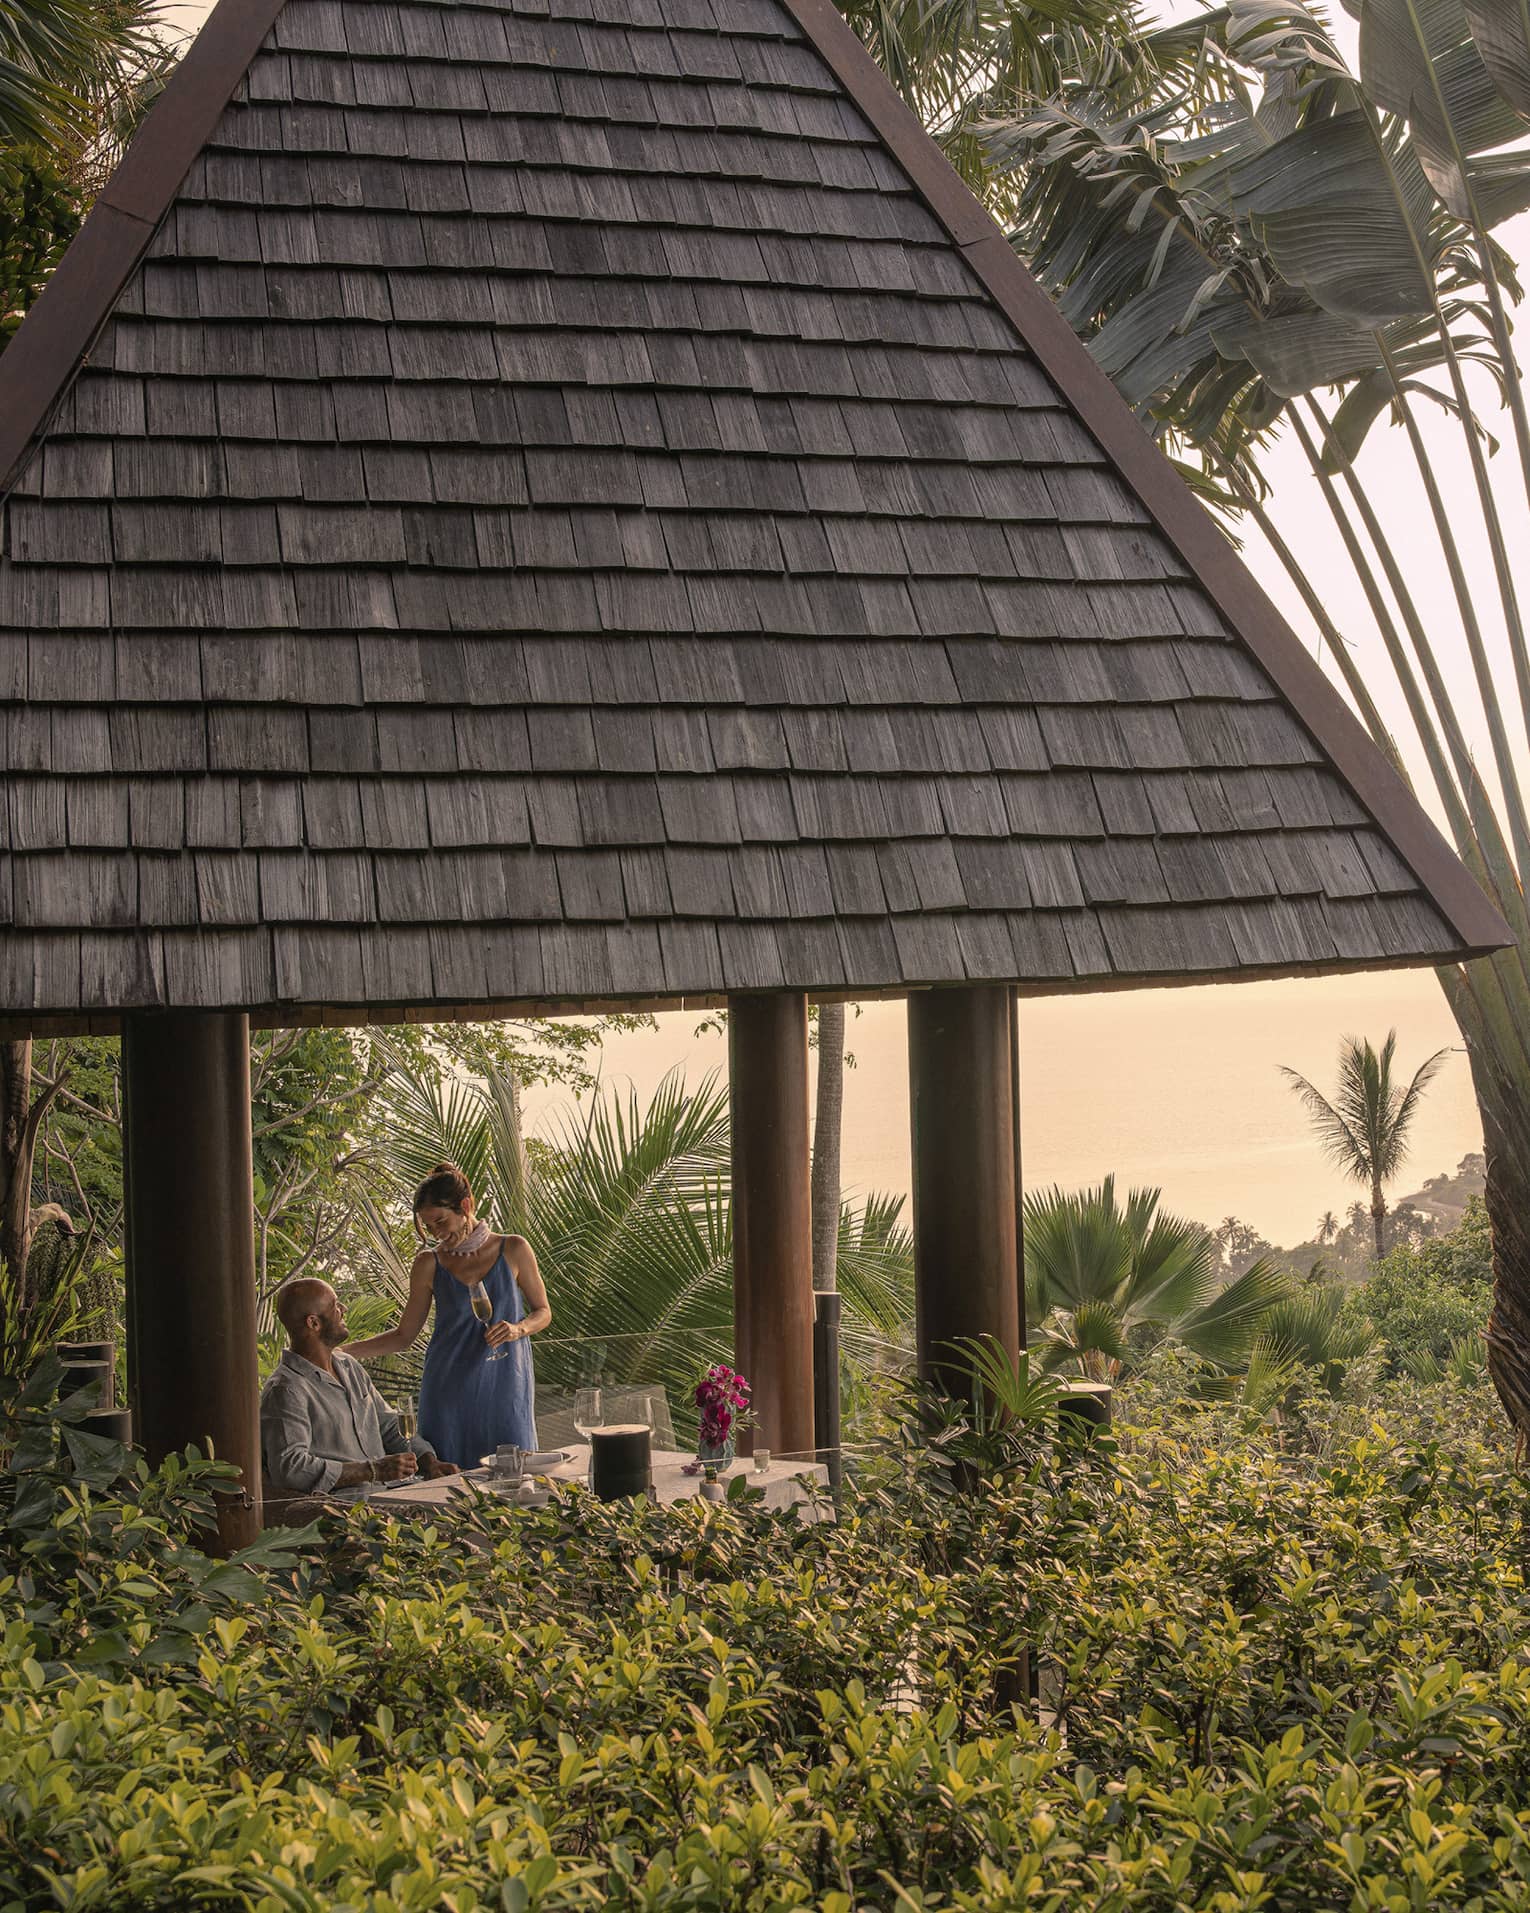 A couple with champagne in a tall hilltop pavilion with a dark, straw roof, set amidst lush forest and a giant fan palm tree.